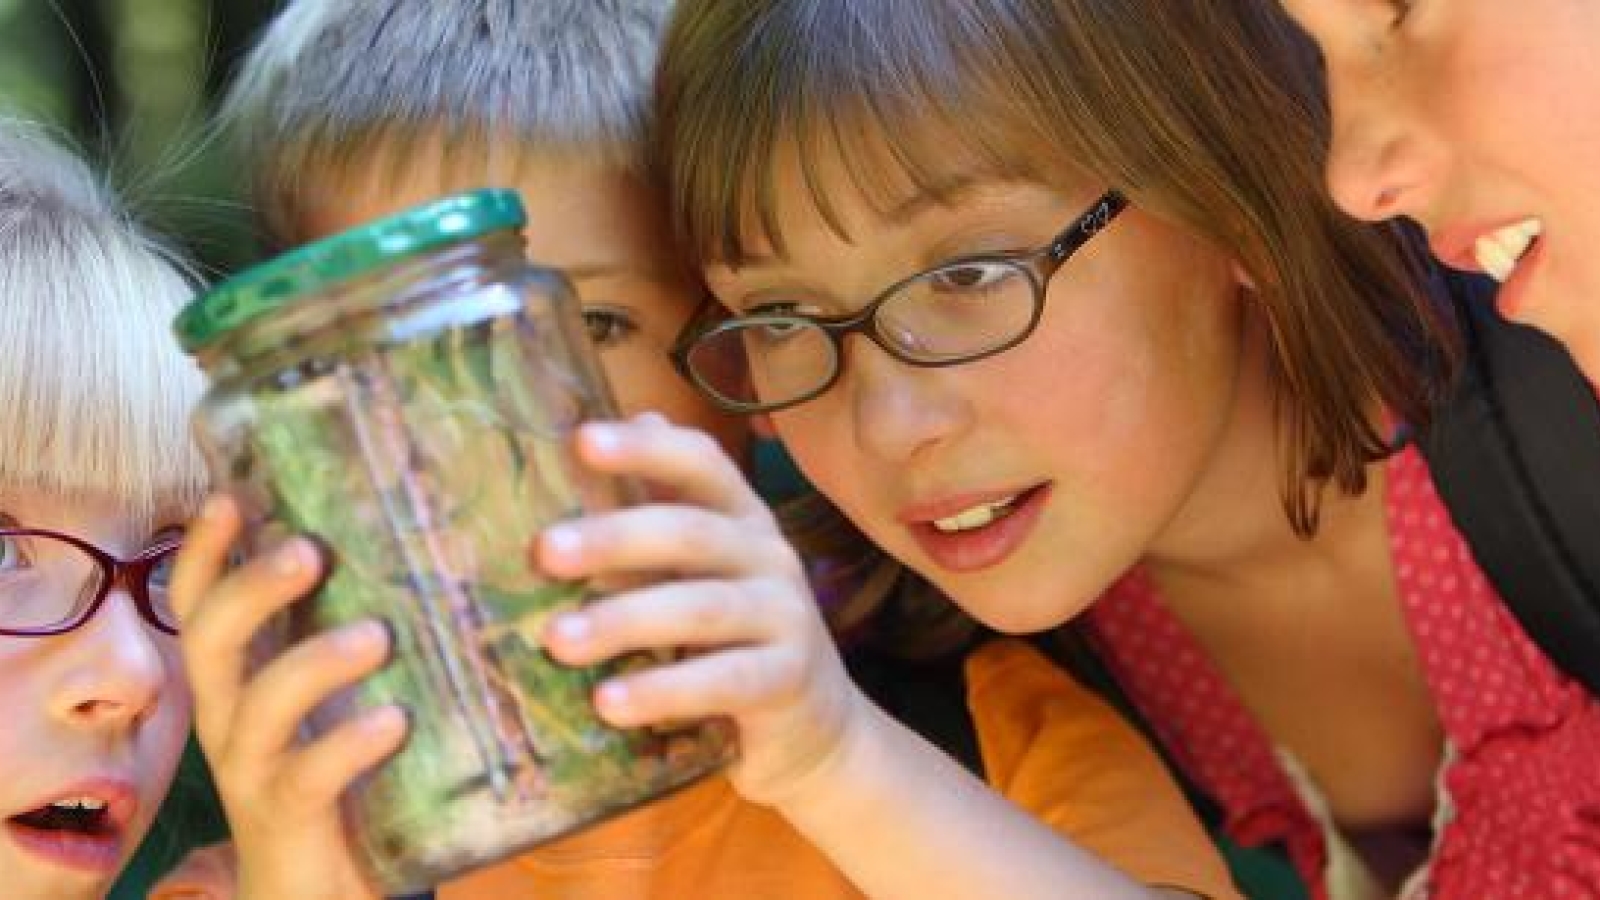 Kids look at insects in a jar